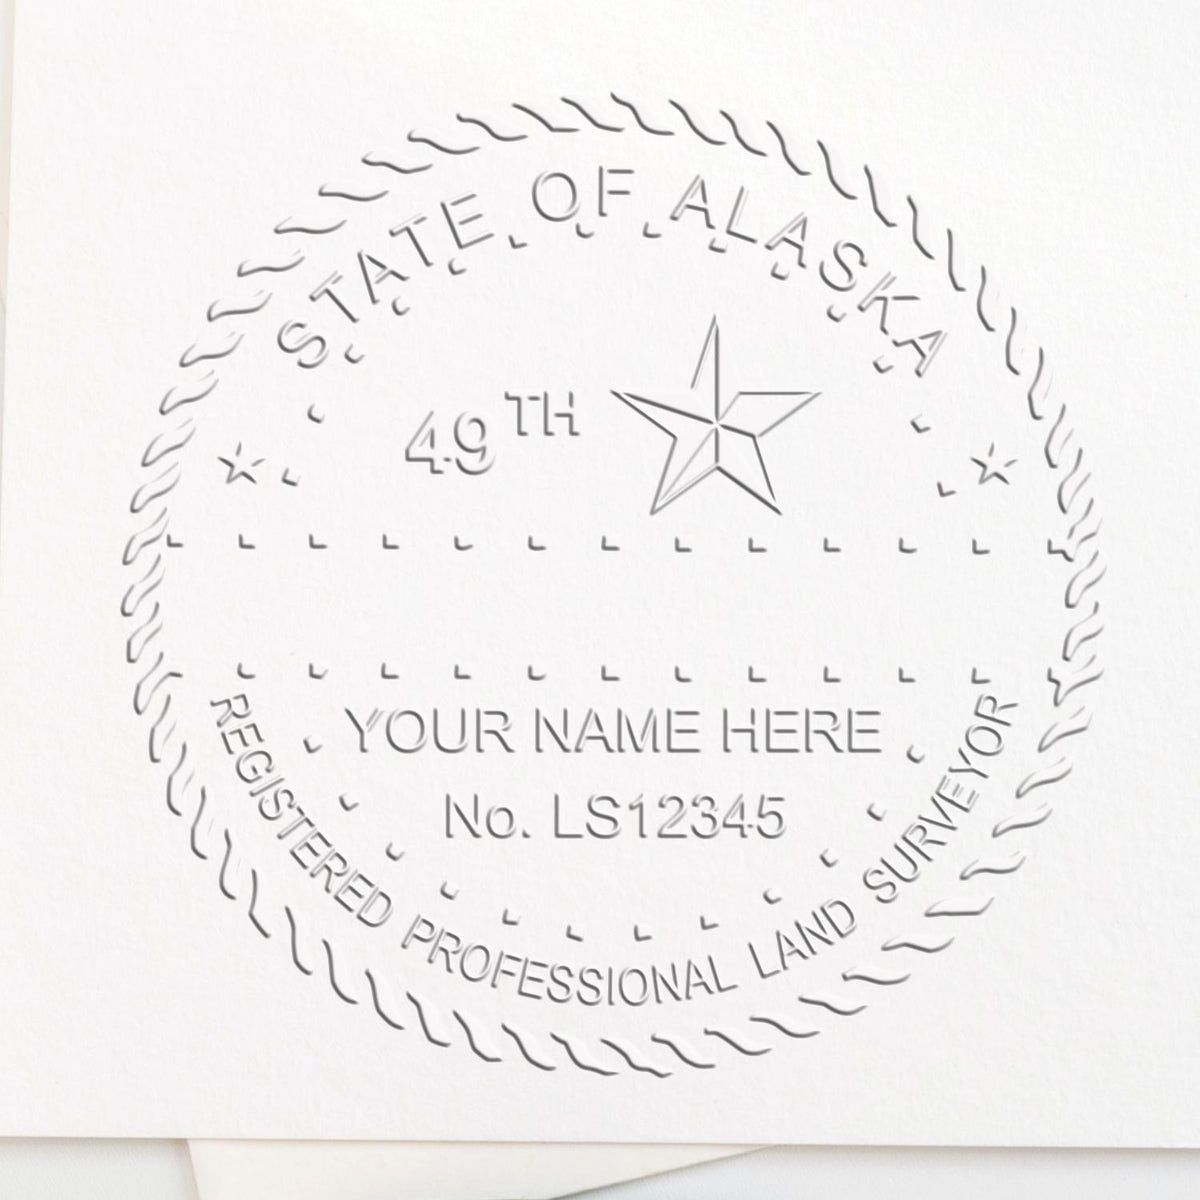 A lifestyle photo showing a stamped image of the Handheld Alaska Land Surveyor Seal on a piece of paper